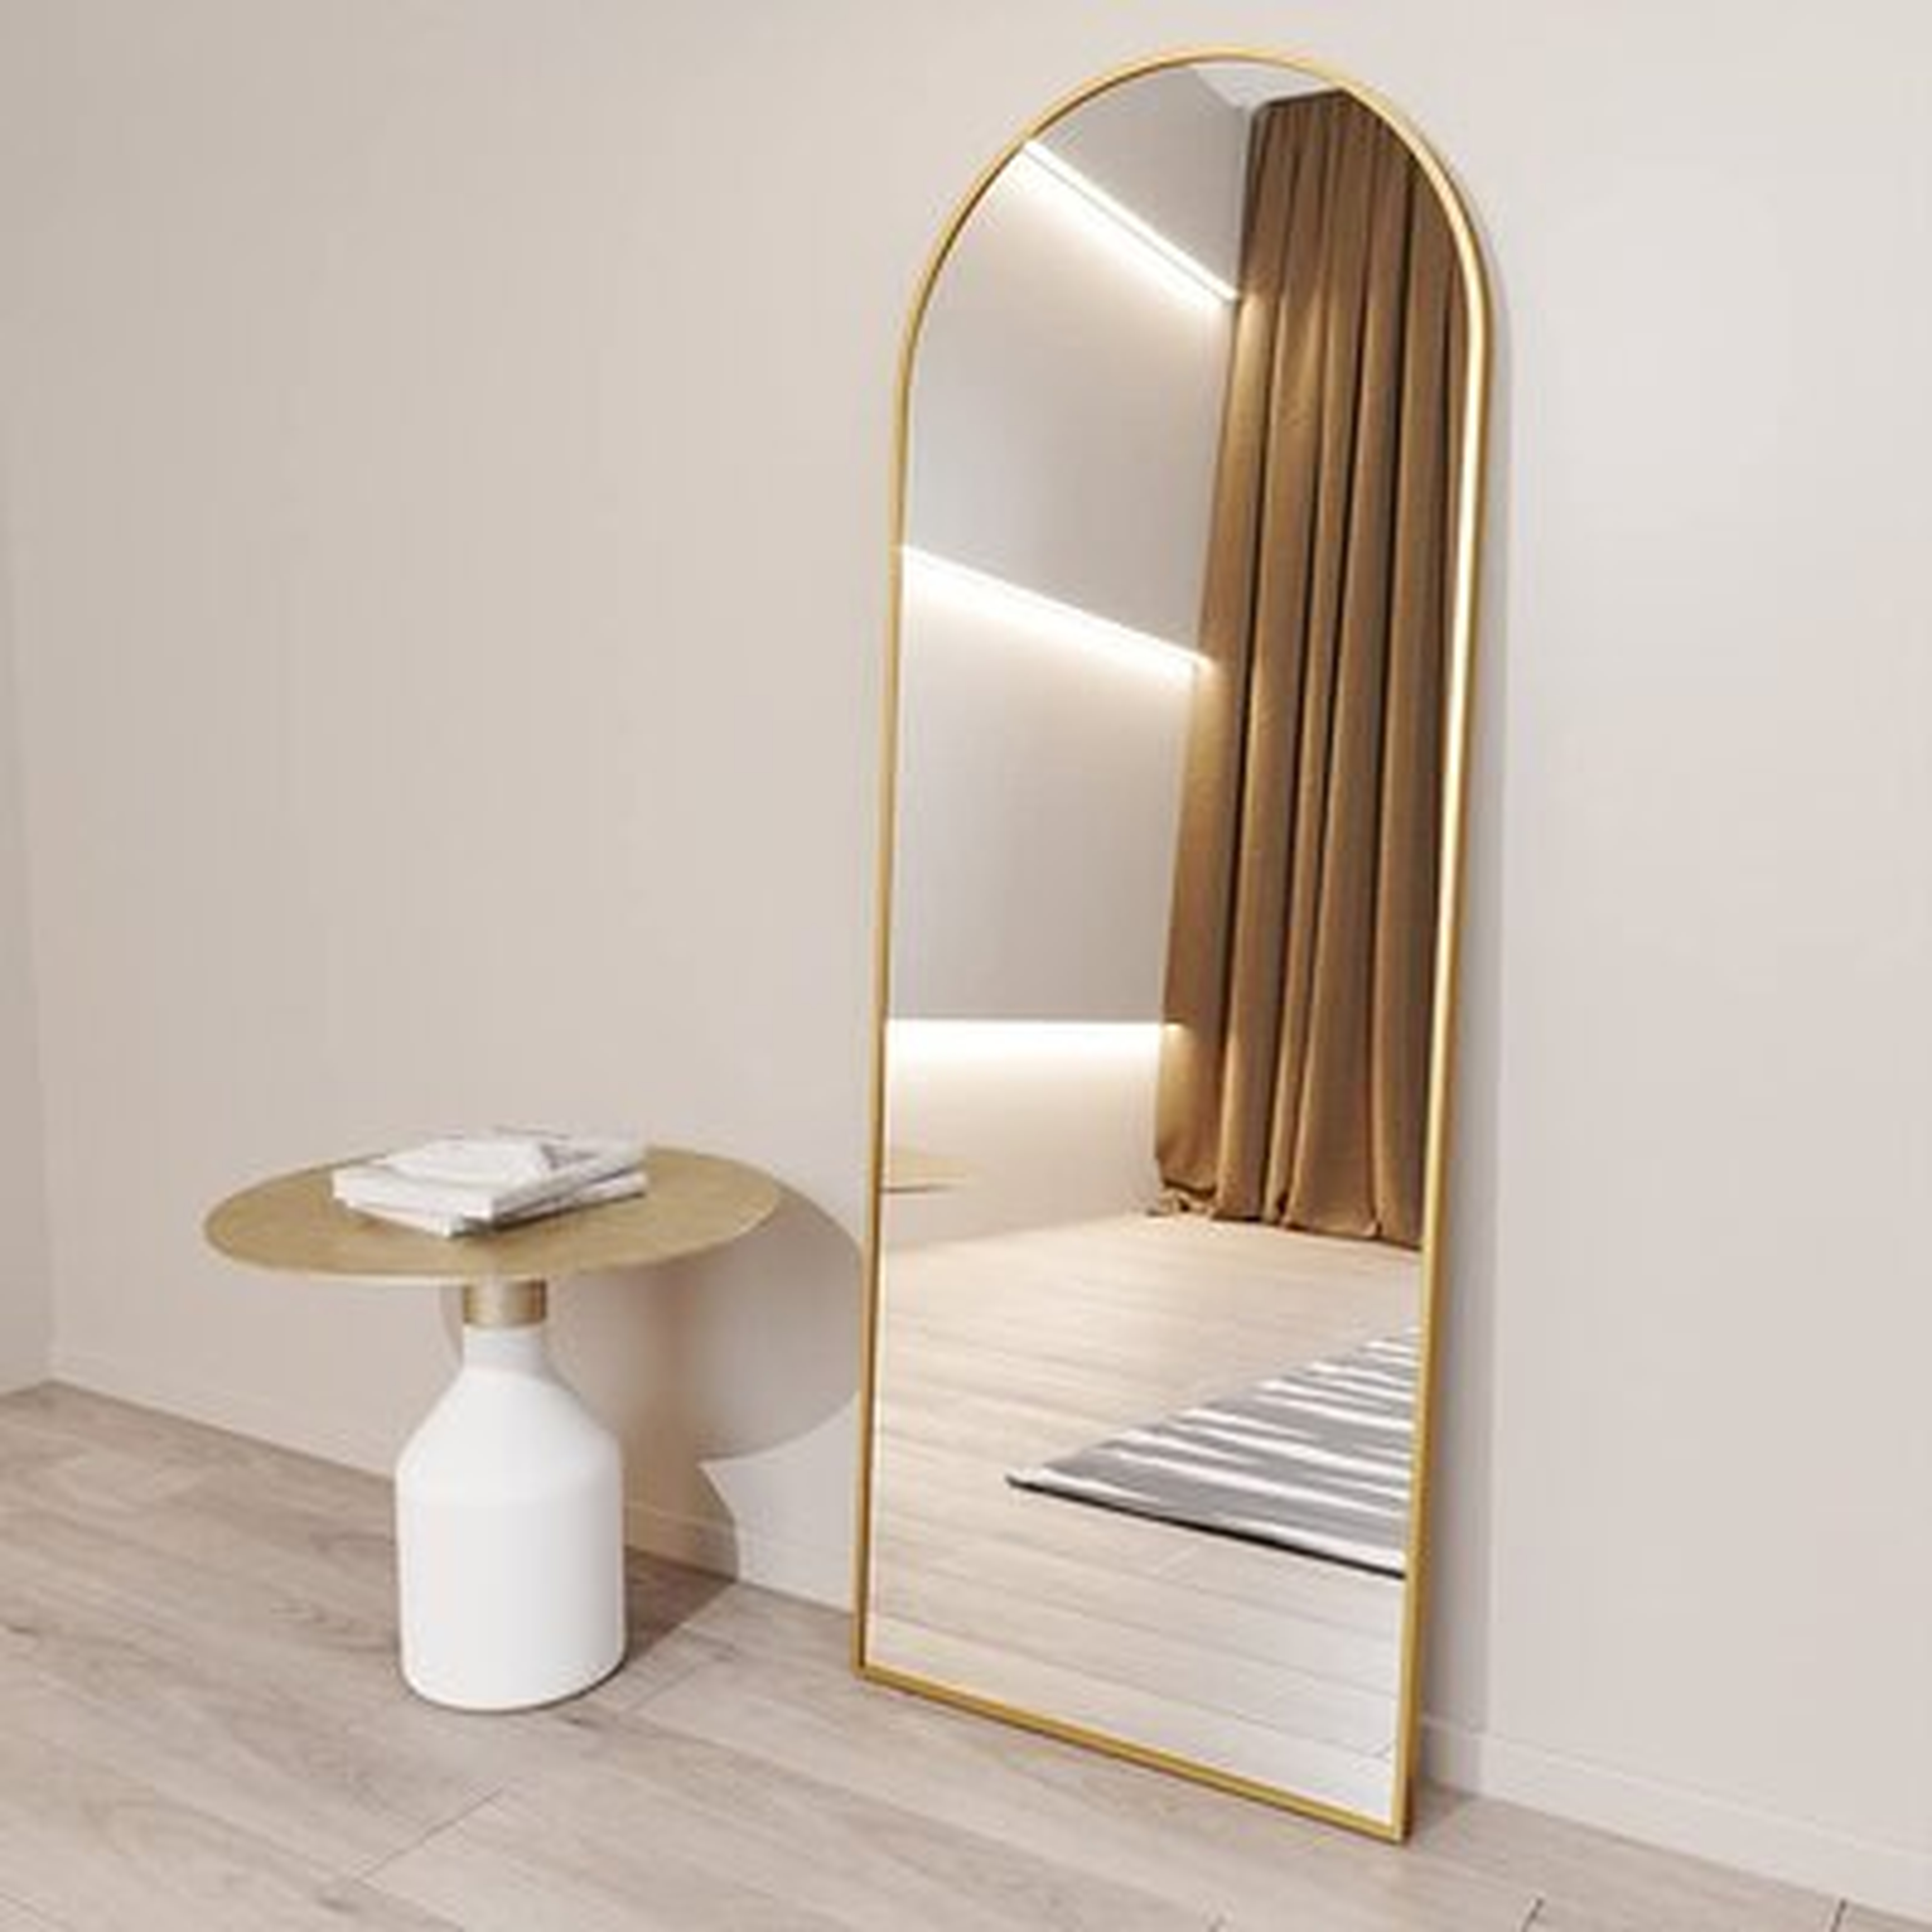 Full Length Mirror Arch Floor Mirror Wall Mirror Hanging Or Leaning Arched-Top Full Body Mirror With Stand For Bedroom, Dressing Room - Wayfair